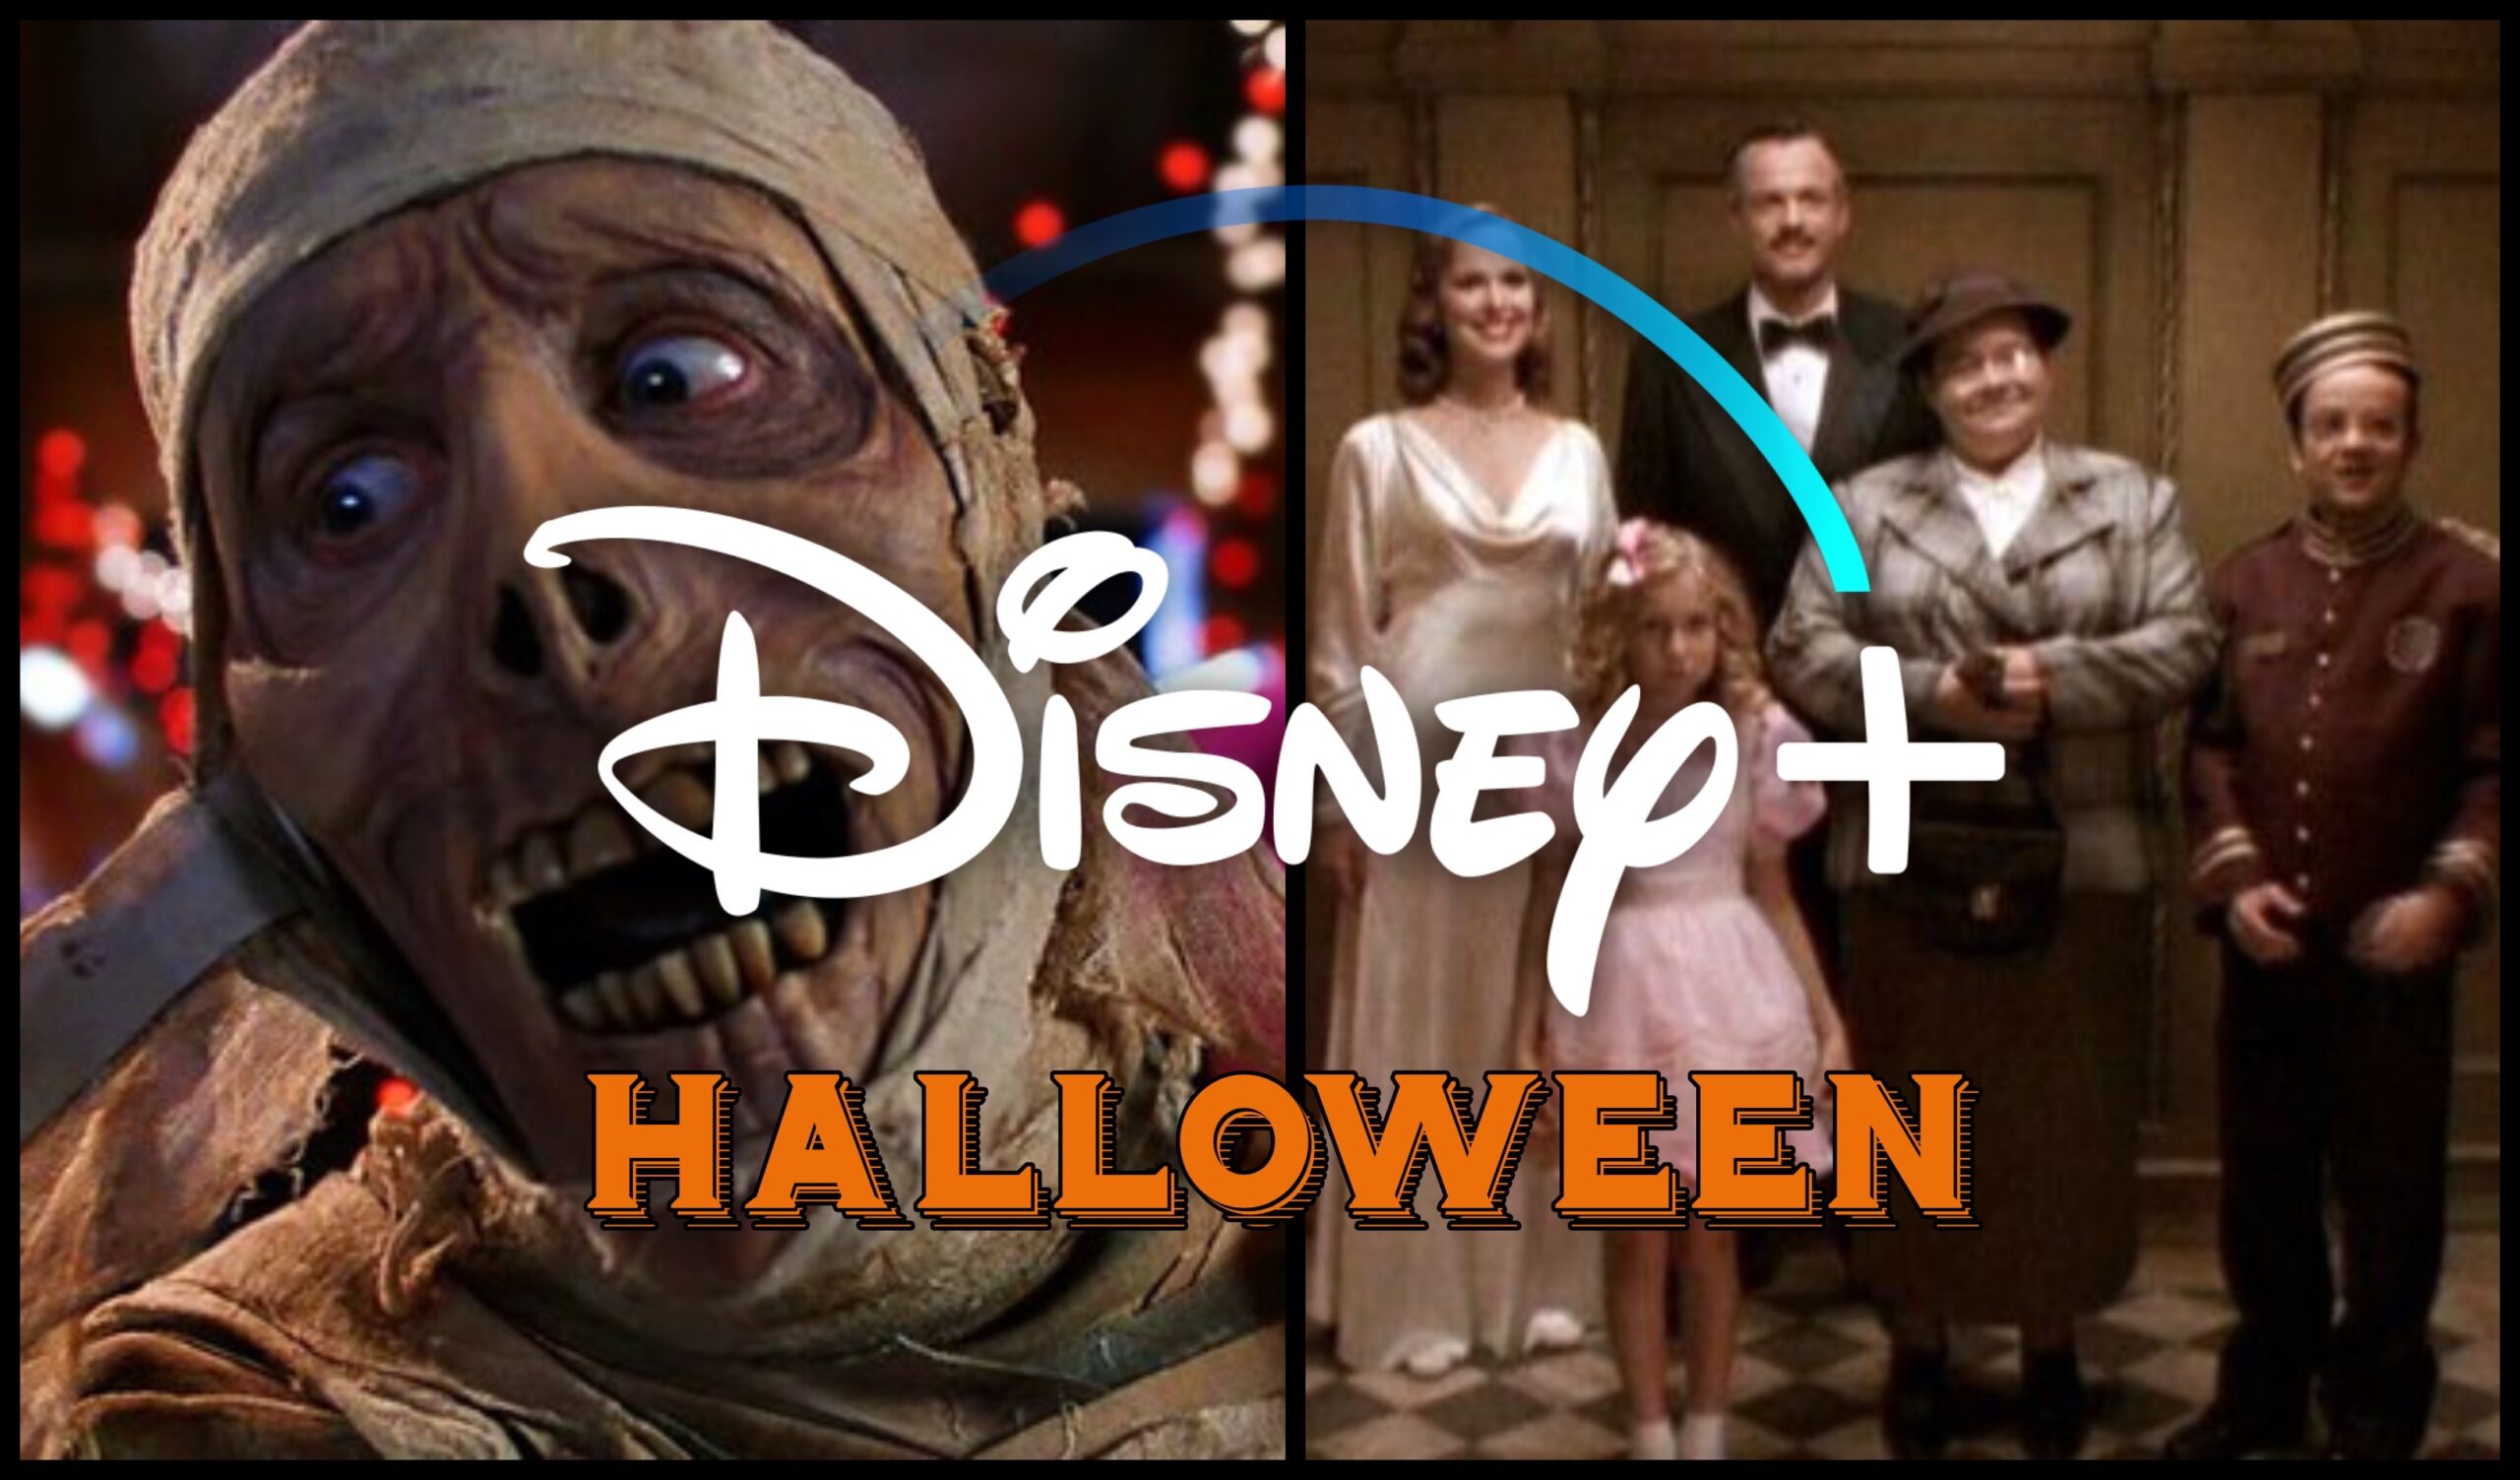 Disney Fans Upset that Some Iconic Movies are Missing from the Disney+ Halloween Collection